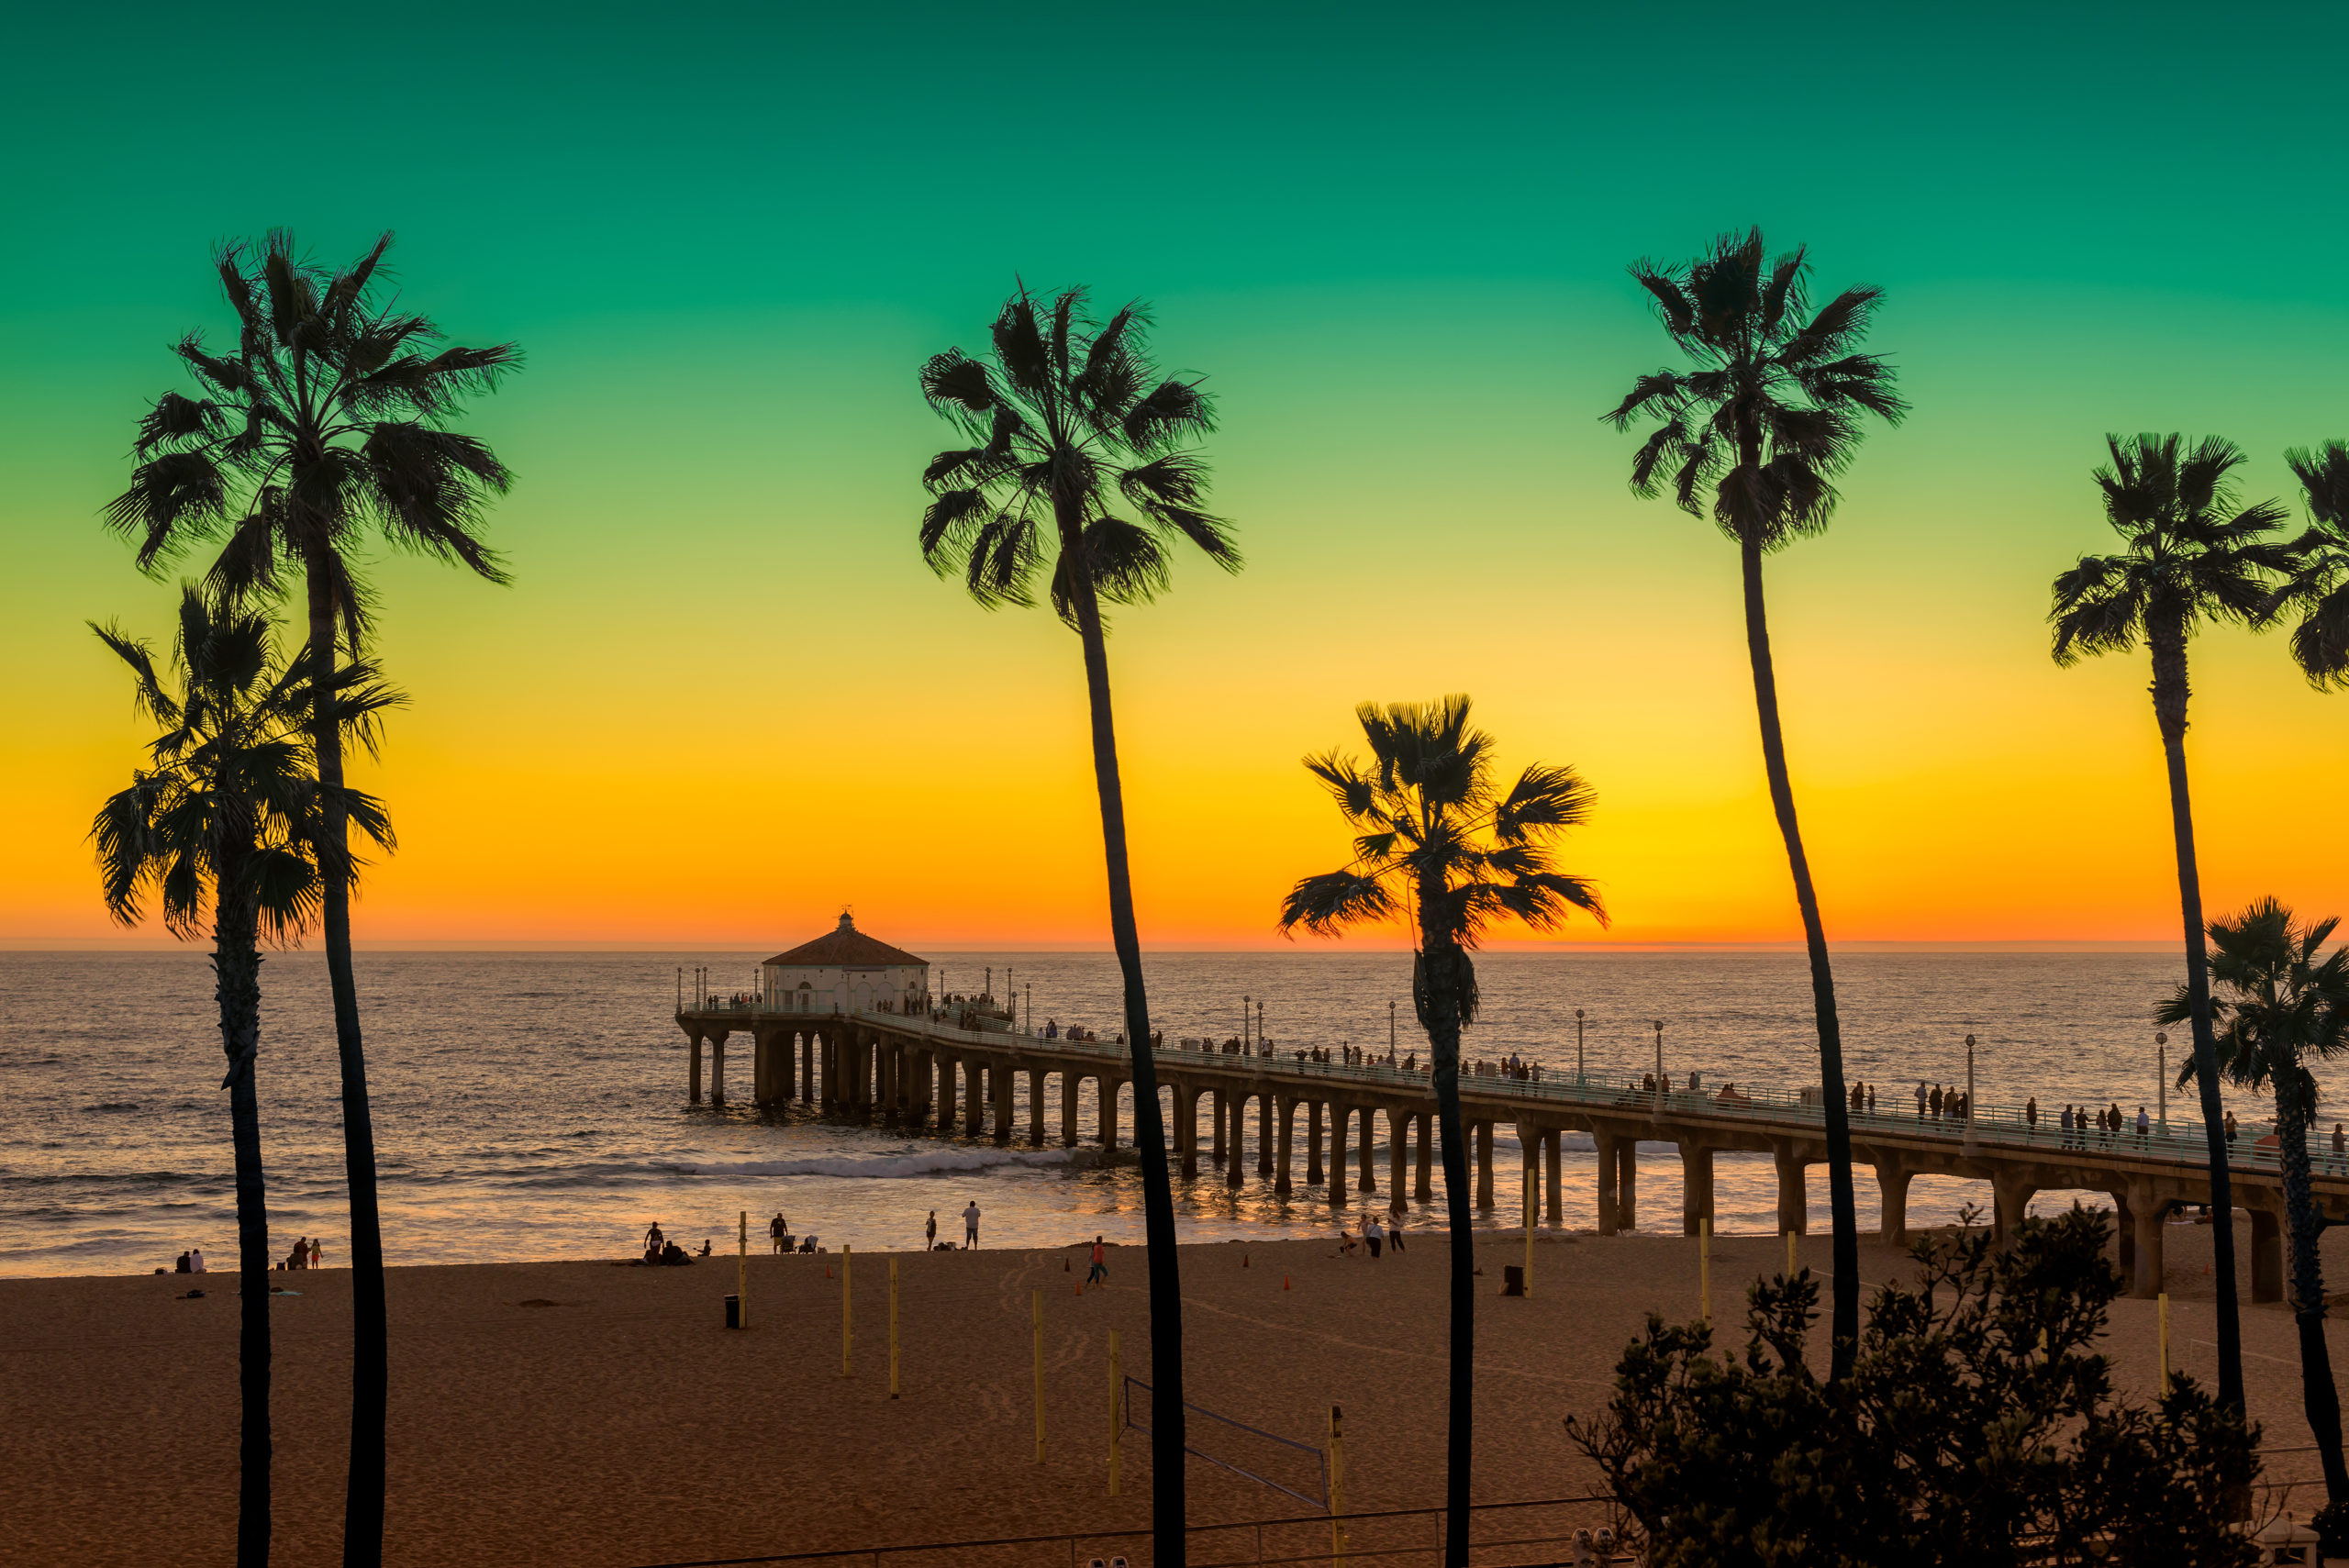 Manhattan Beach with Palm trees and pier at sunset in Los Angeles, California. Vintage processed. Fashion travel and tropical beach concept.